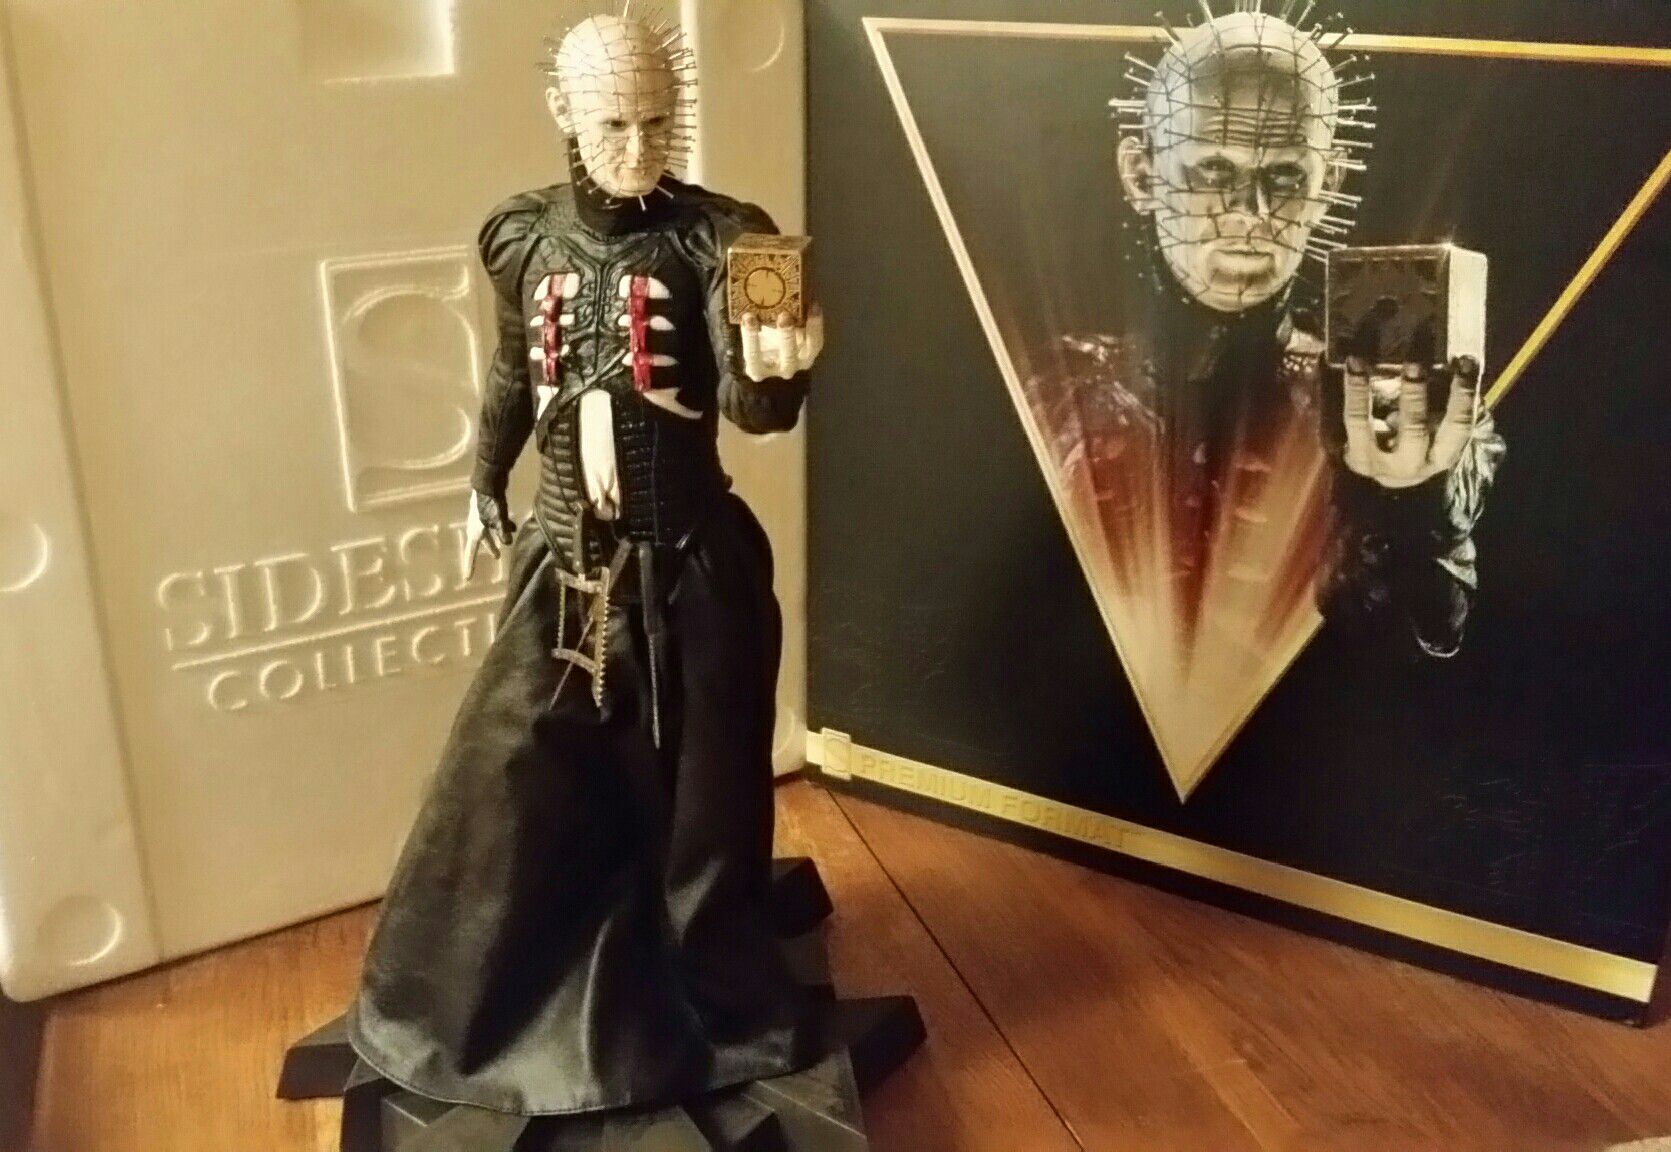 Sideshow Collectibles - Hellraiser Pinhead Statue - perfect condition, art box present, 21"